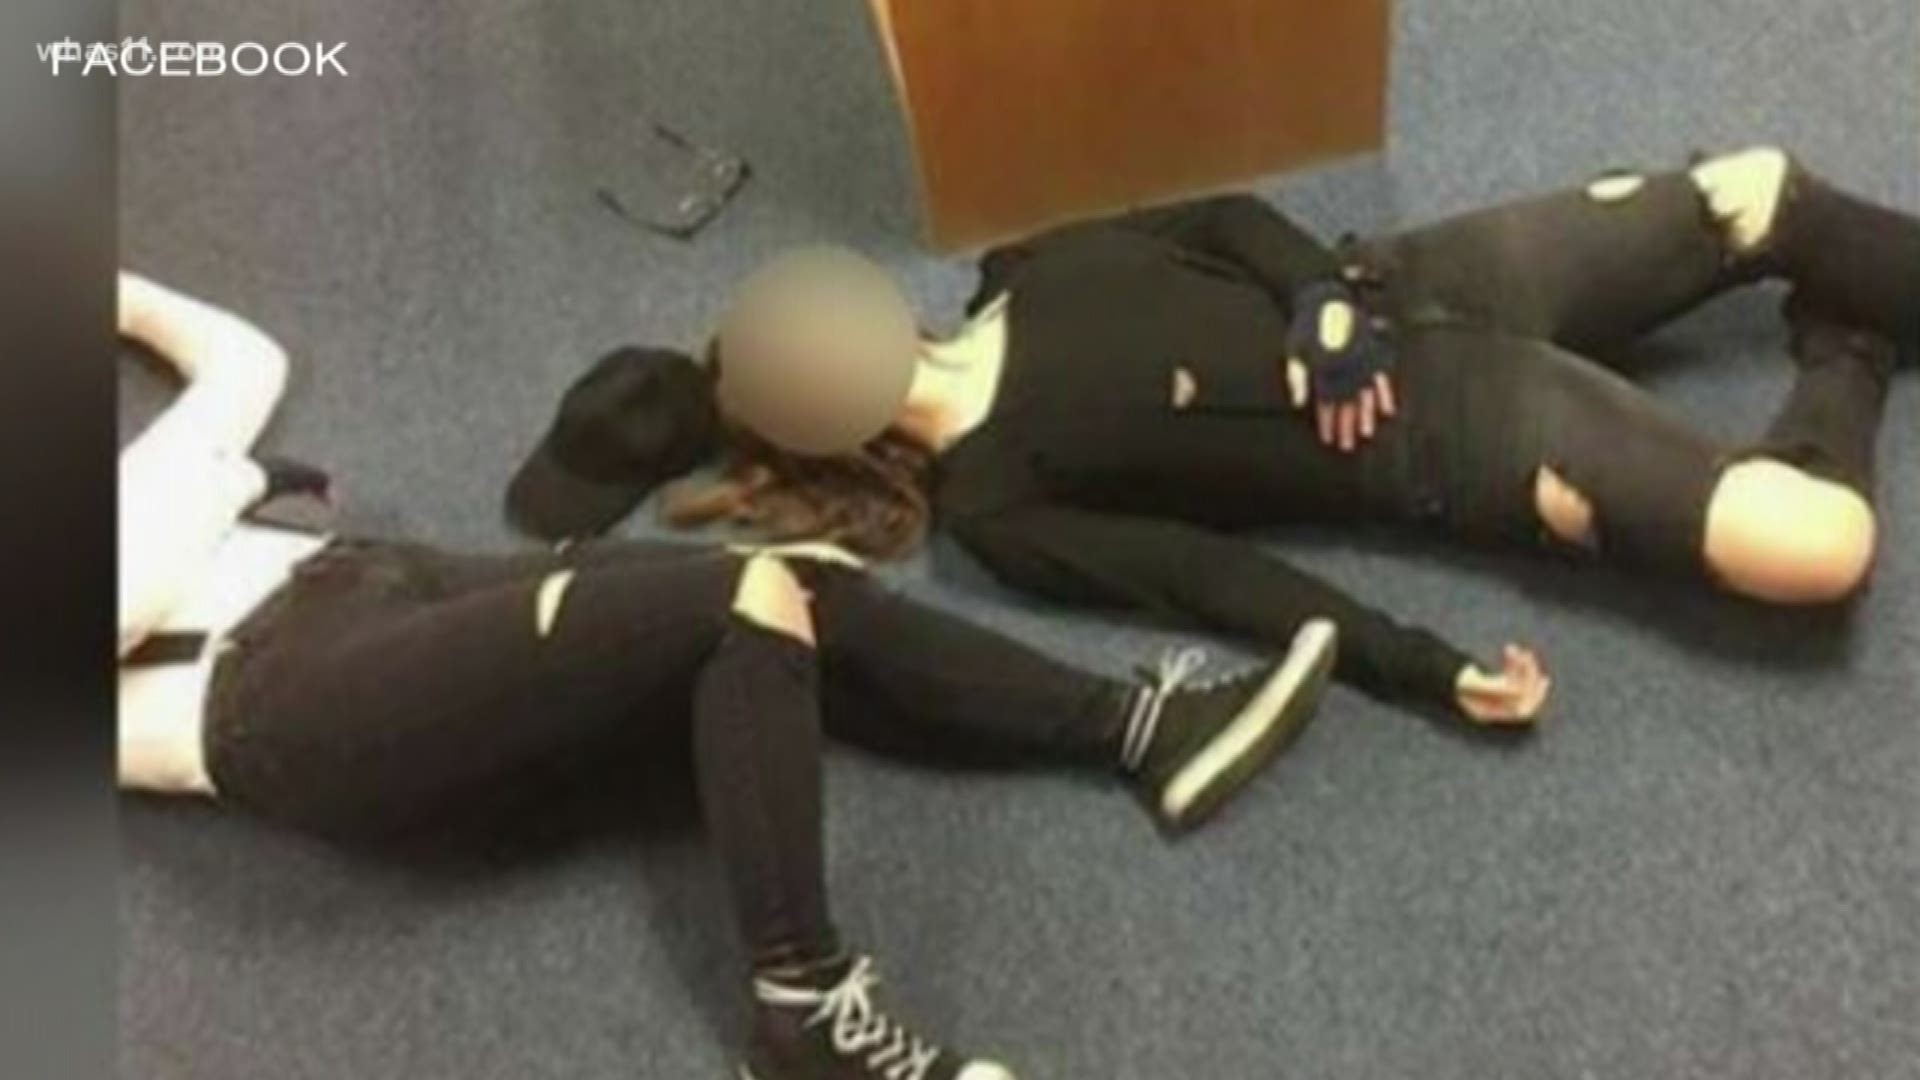 The two students have been suspended after dressing as the Columbine shooters who killed 15 people at their high school in 1999.